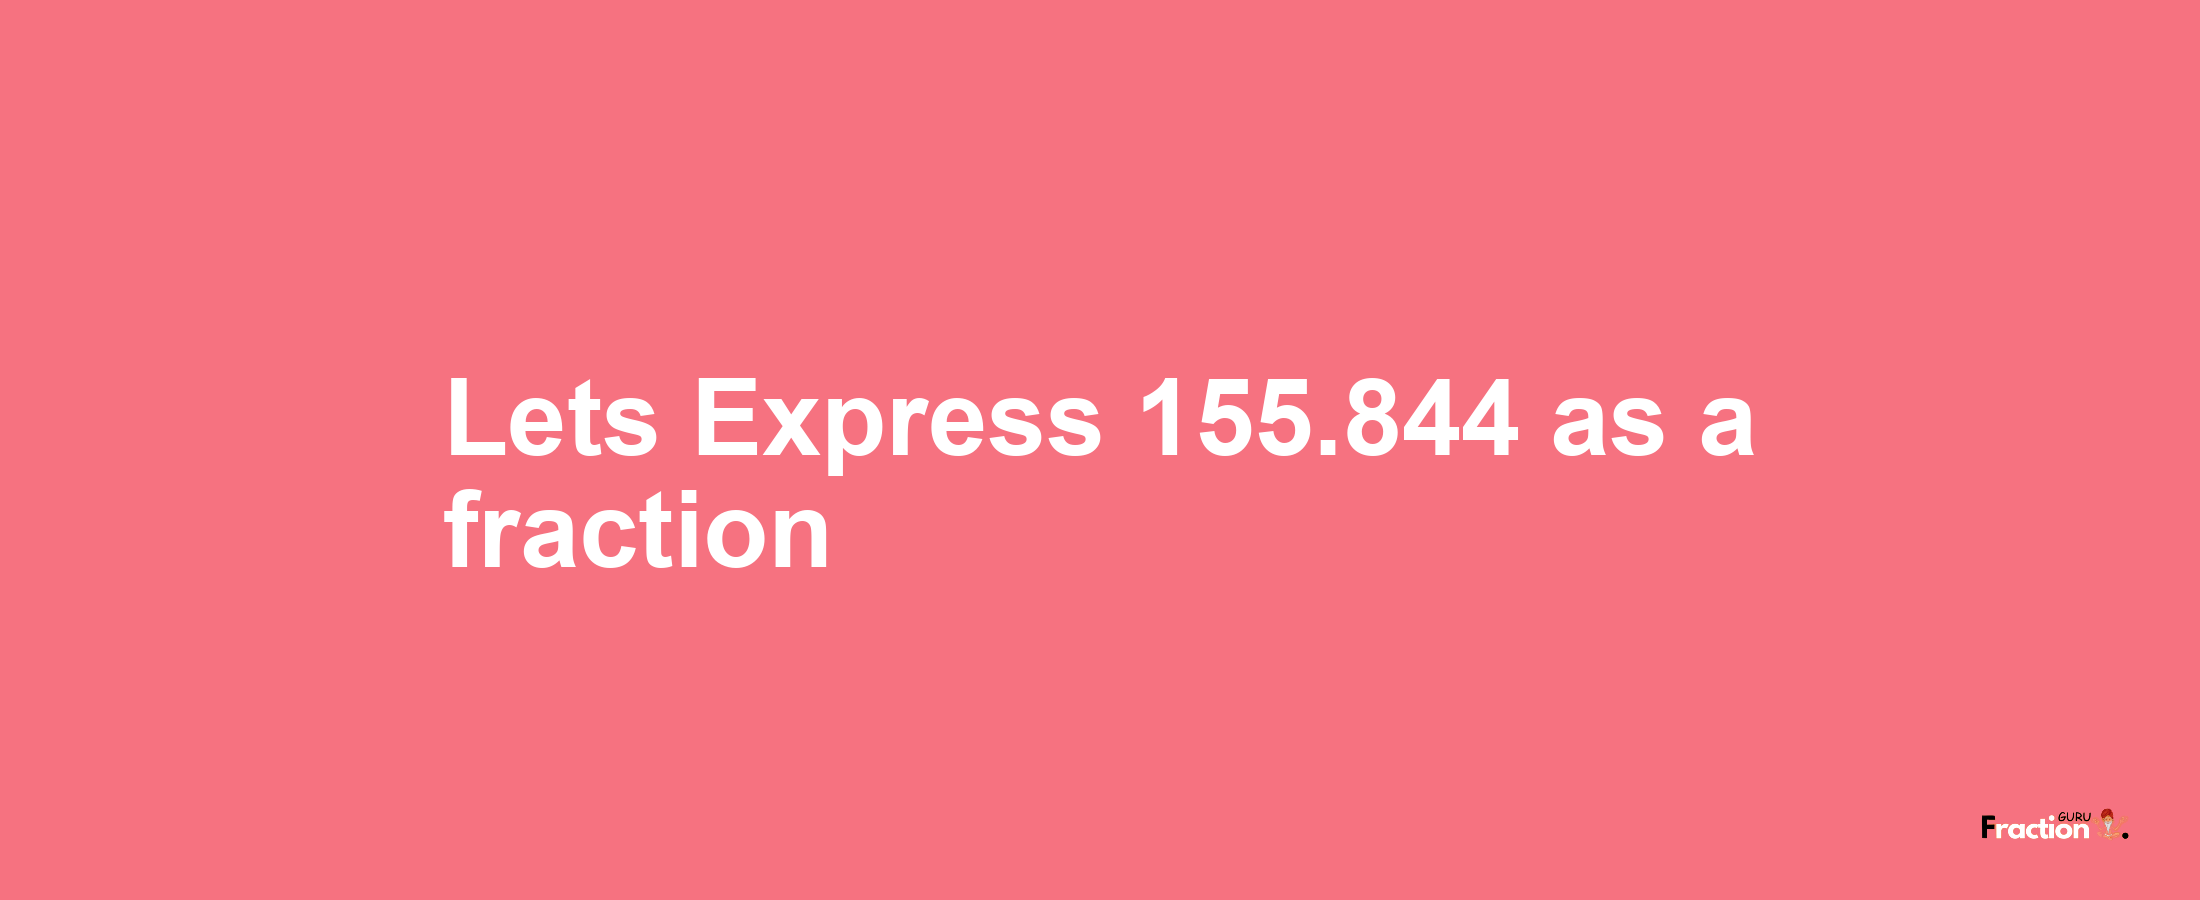 Lets Express 155.844 as afraction